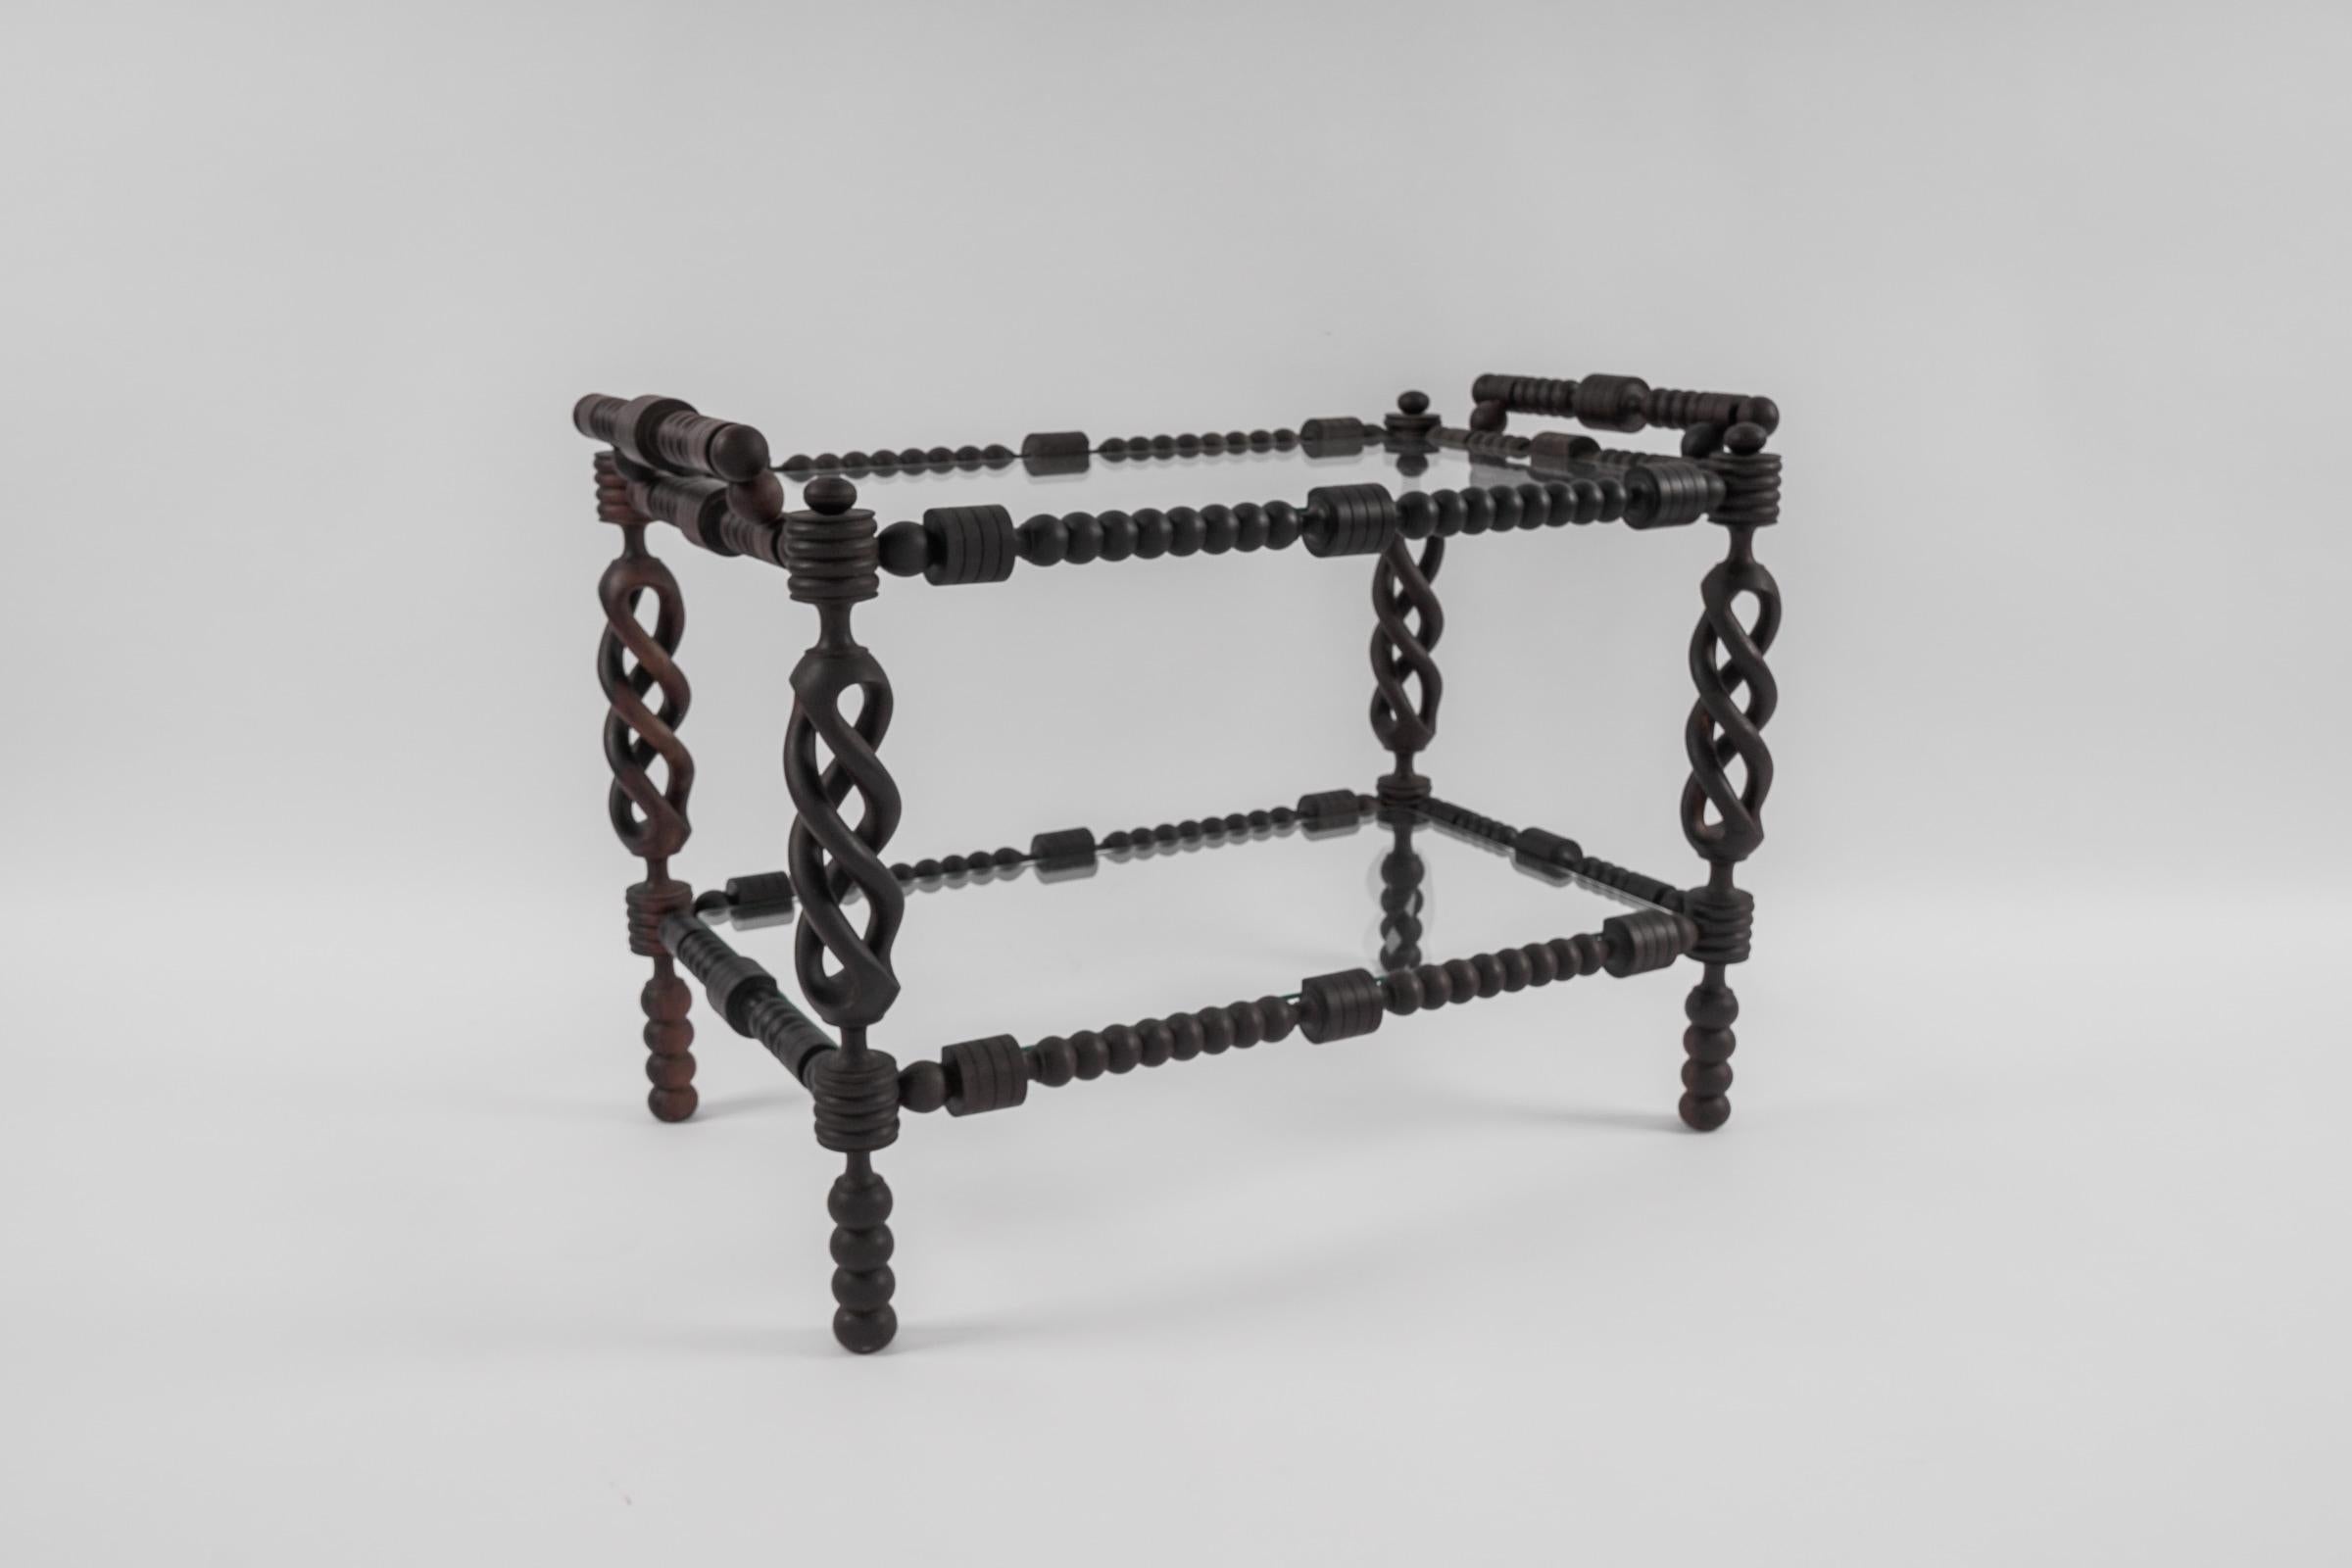 A rare and very decorative serving table from France with African influences. 

We love this serving table.